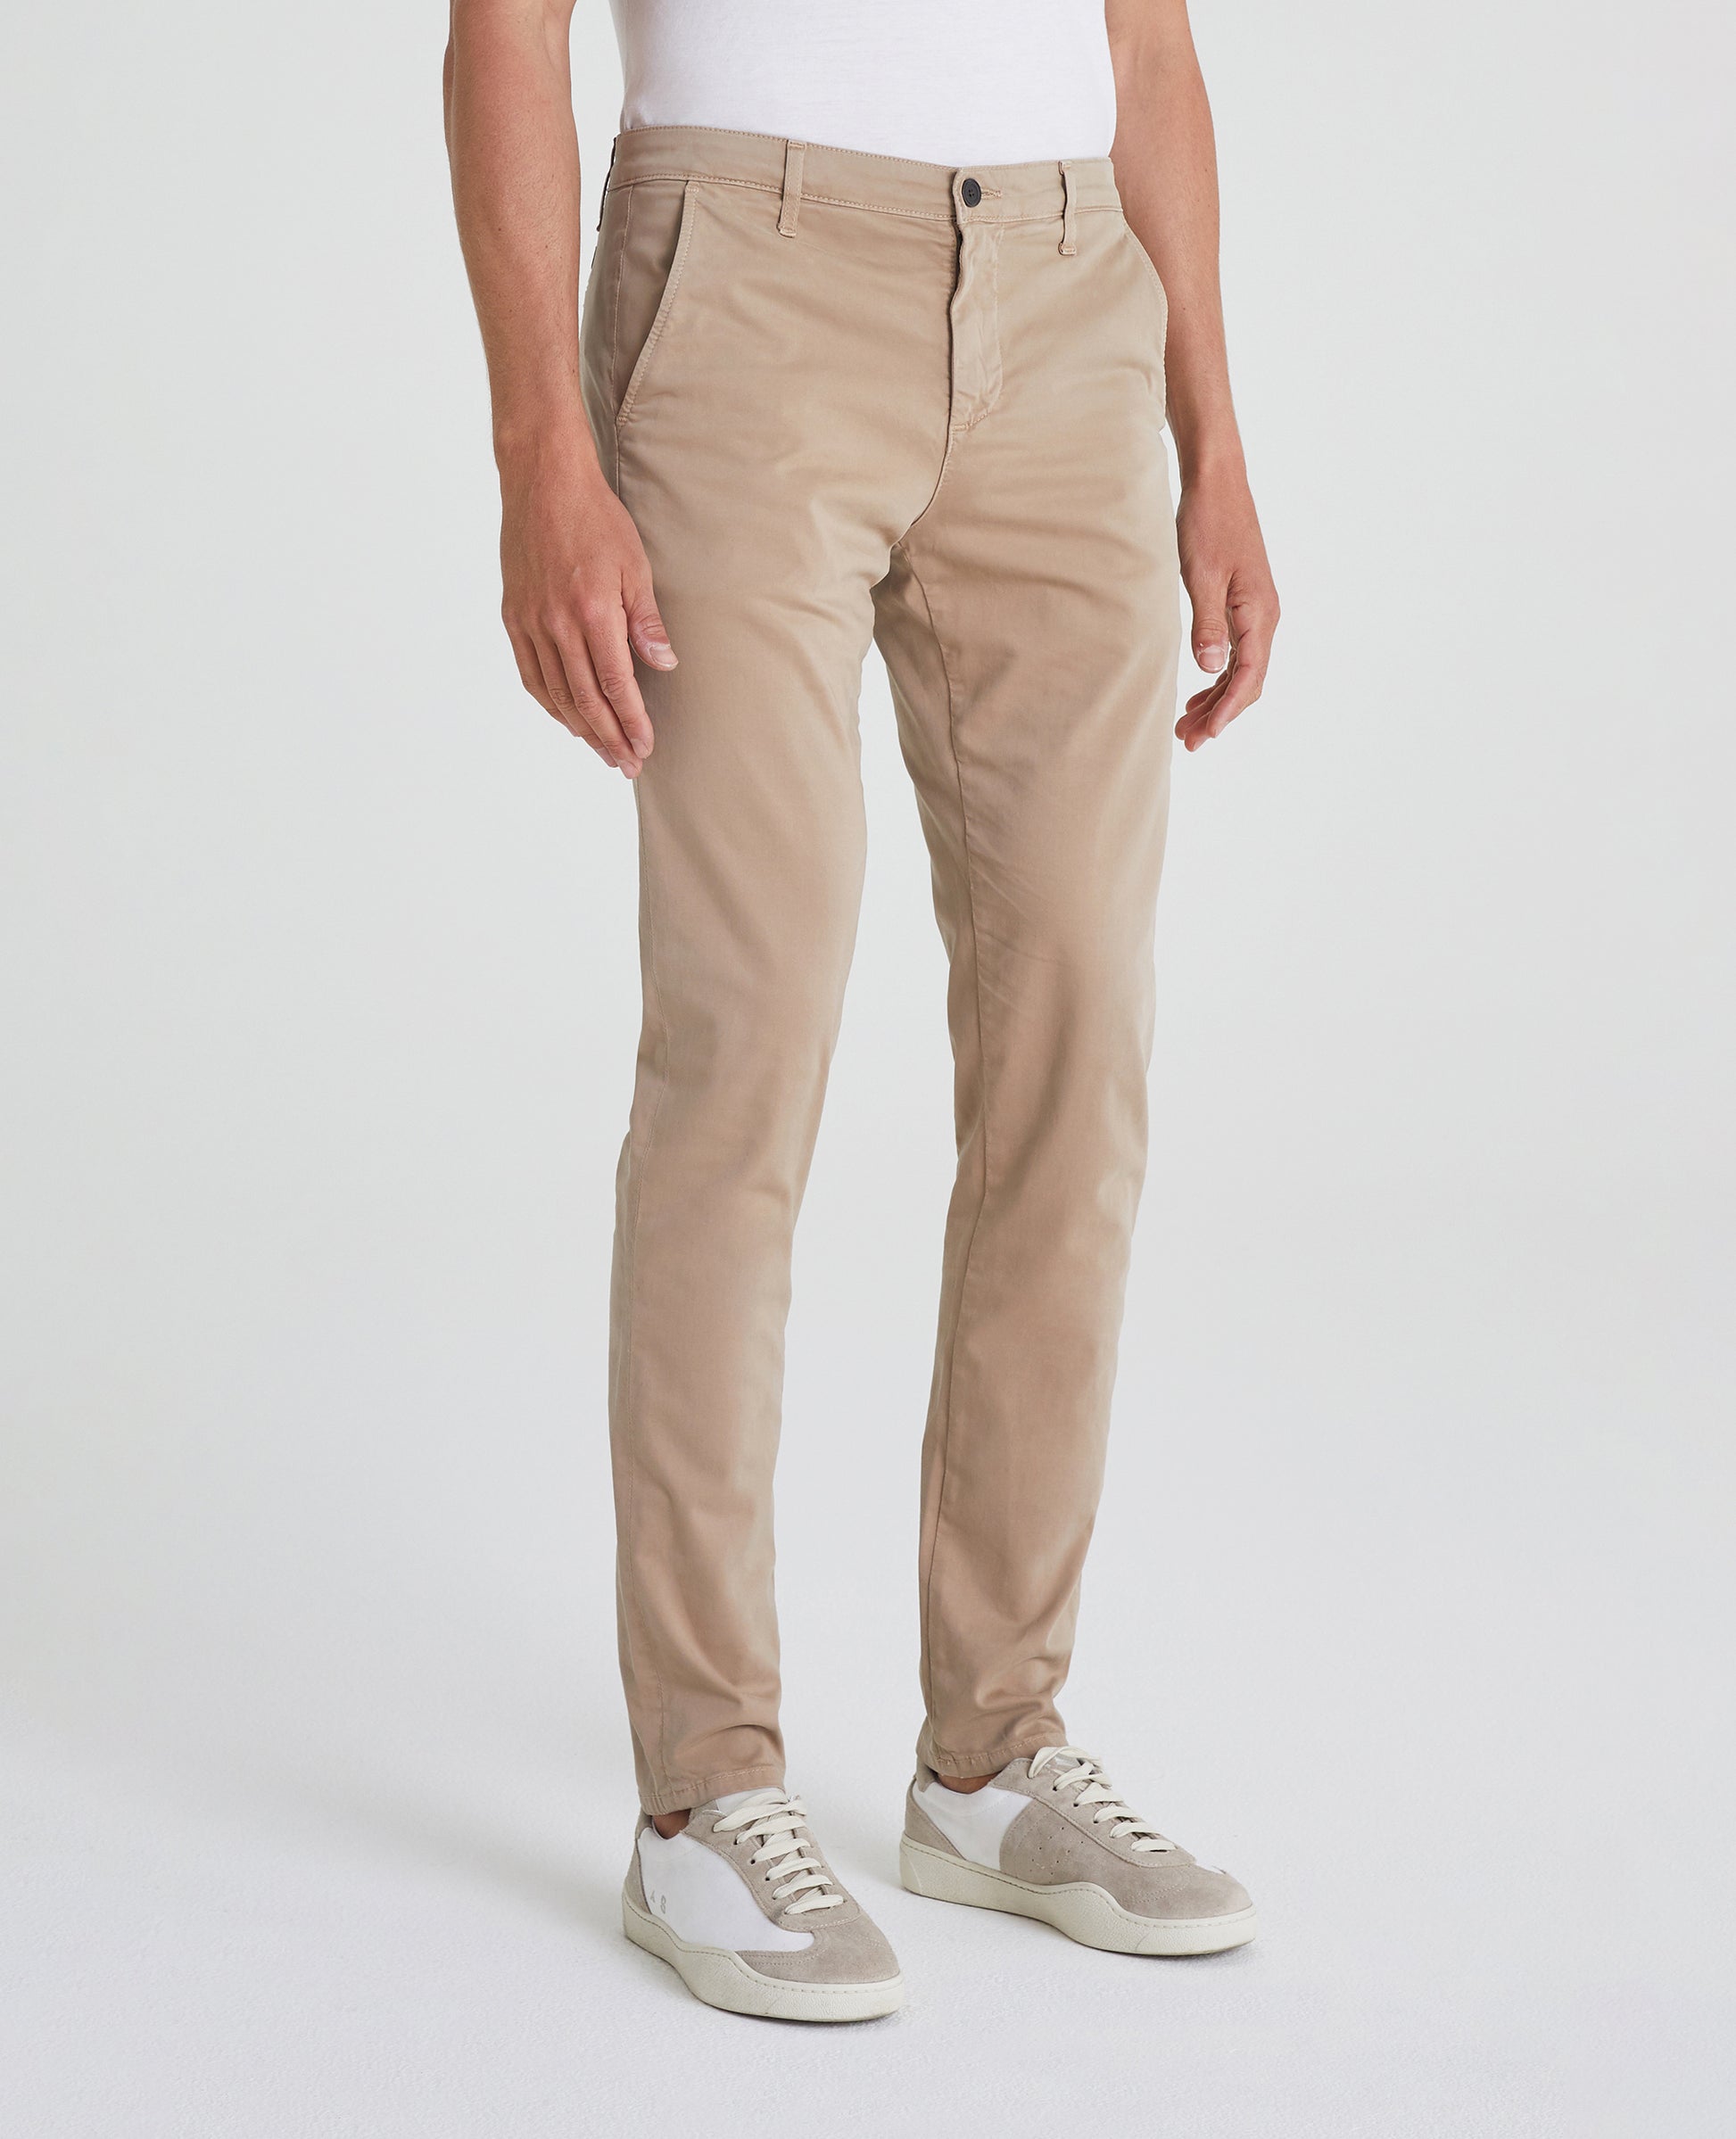 Marshall Parched Trail Modern Slim Trouser Men Bottoms Photo 1